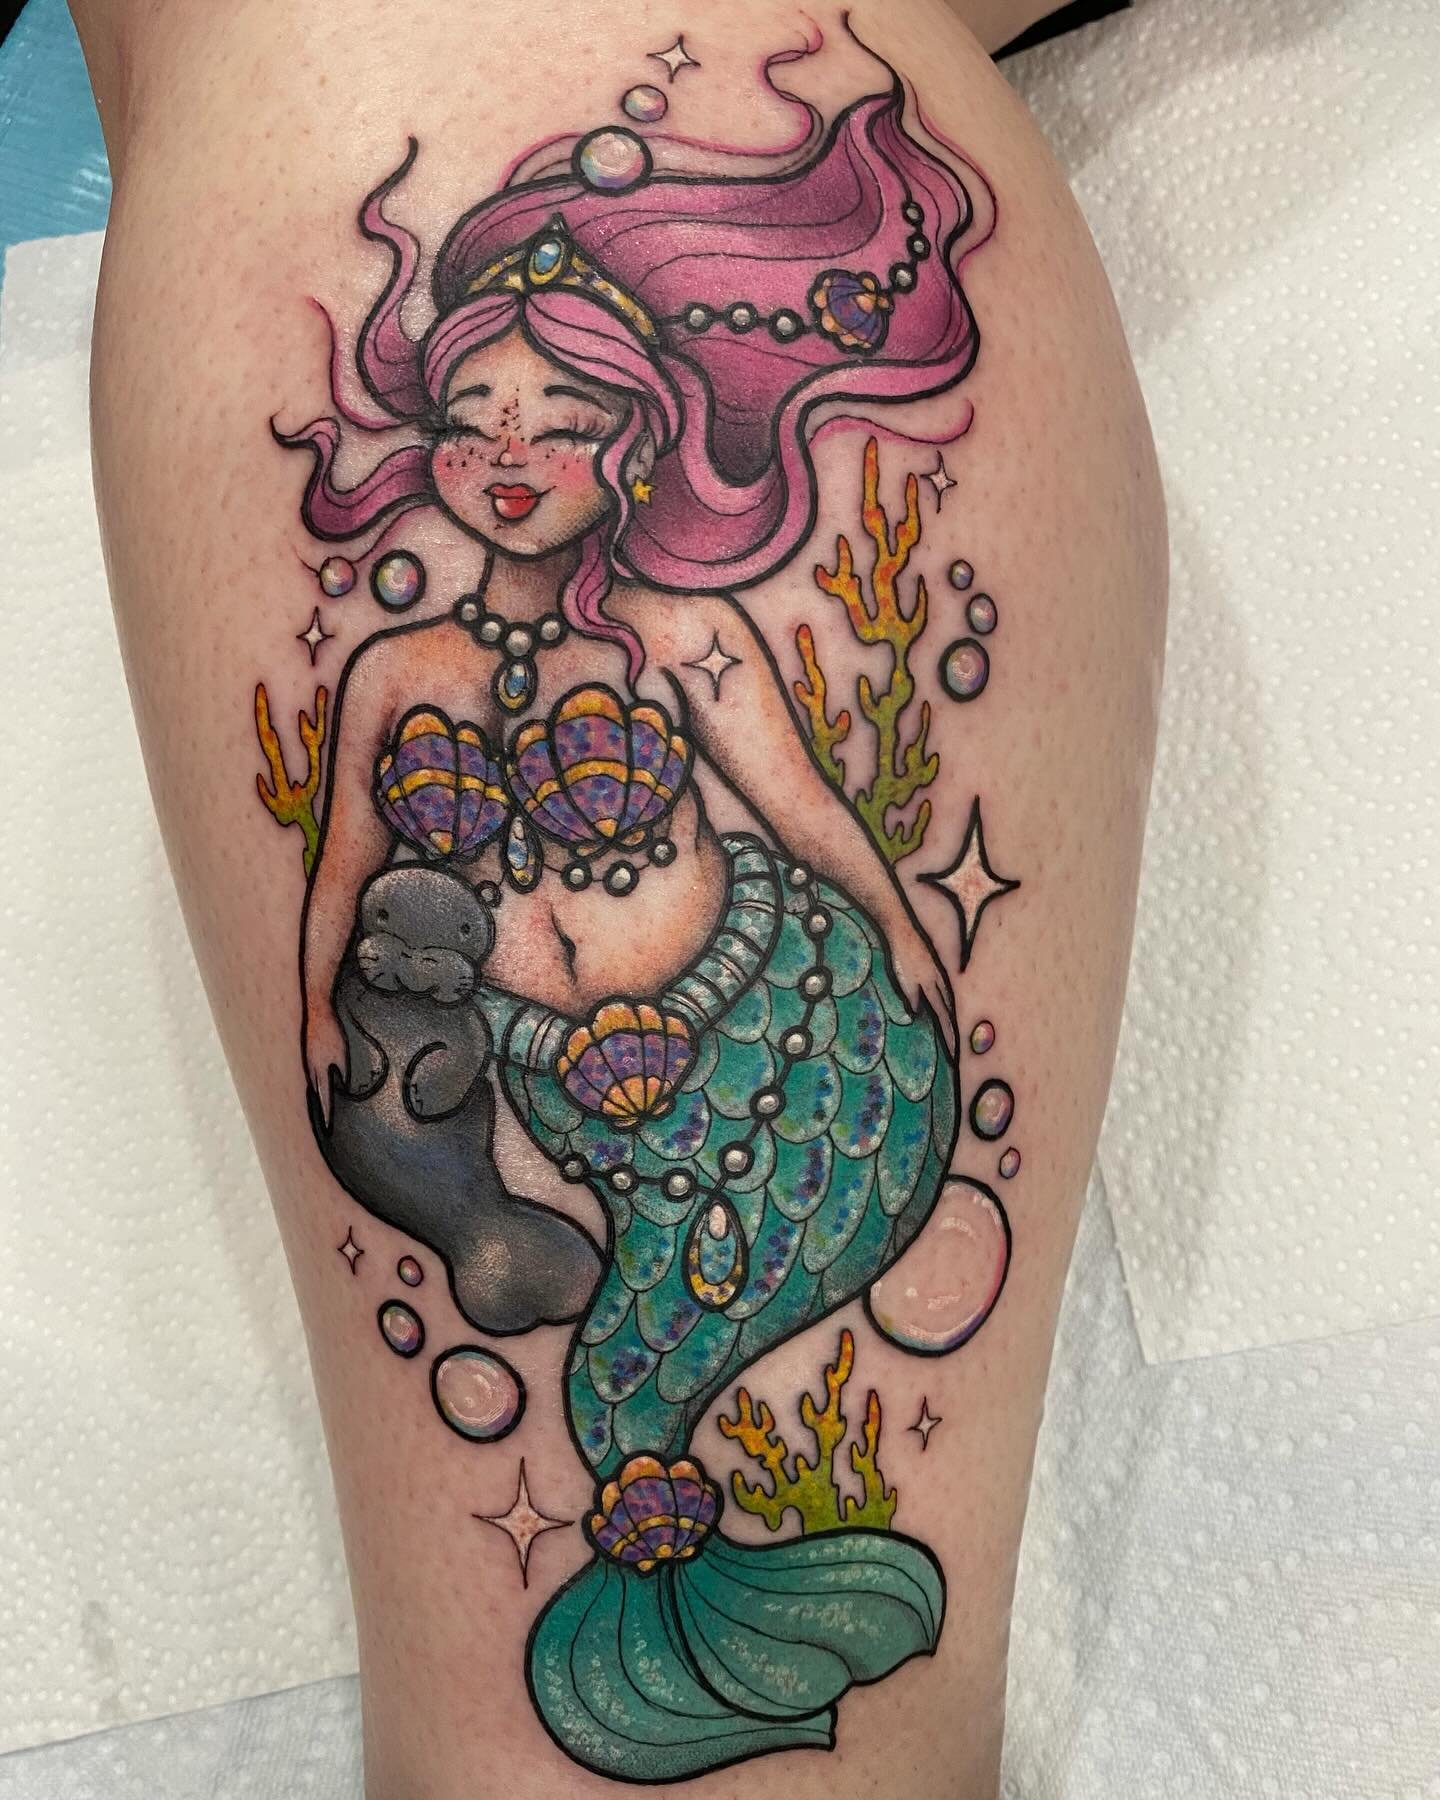 somehow this one slipped thru the cracks.. one of my favs ✨ #mermaid 🧜🏻&zwj;♀️ done a couple years ago! @jerseydeviltattooshop #fresh, #linework, &amp; 2 years #healed ☺️✨
.
.
.
.
.
.
#tattoos #tattoosofinstagram #southjerseytattooartist #girlswith